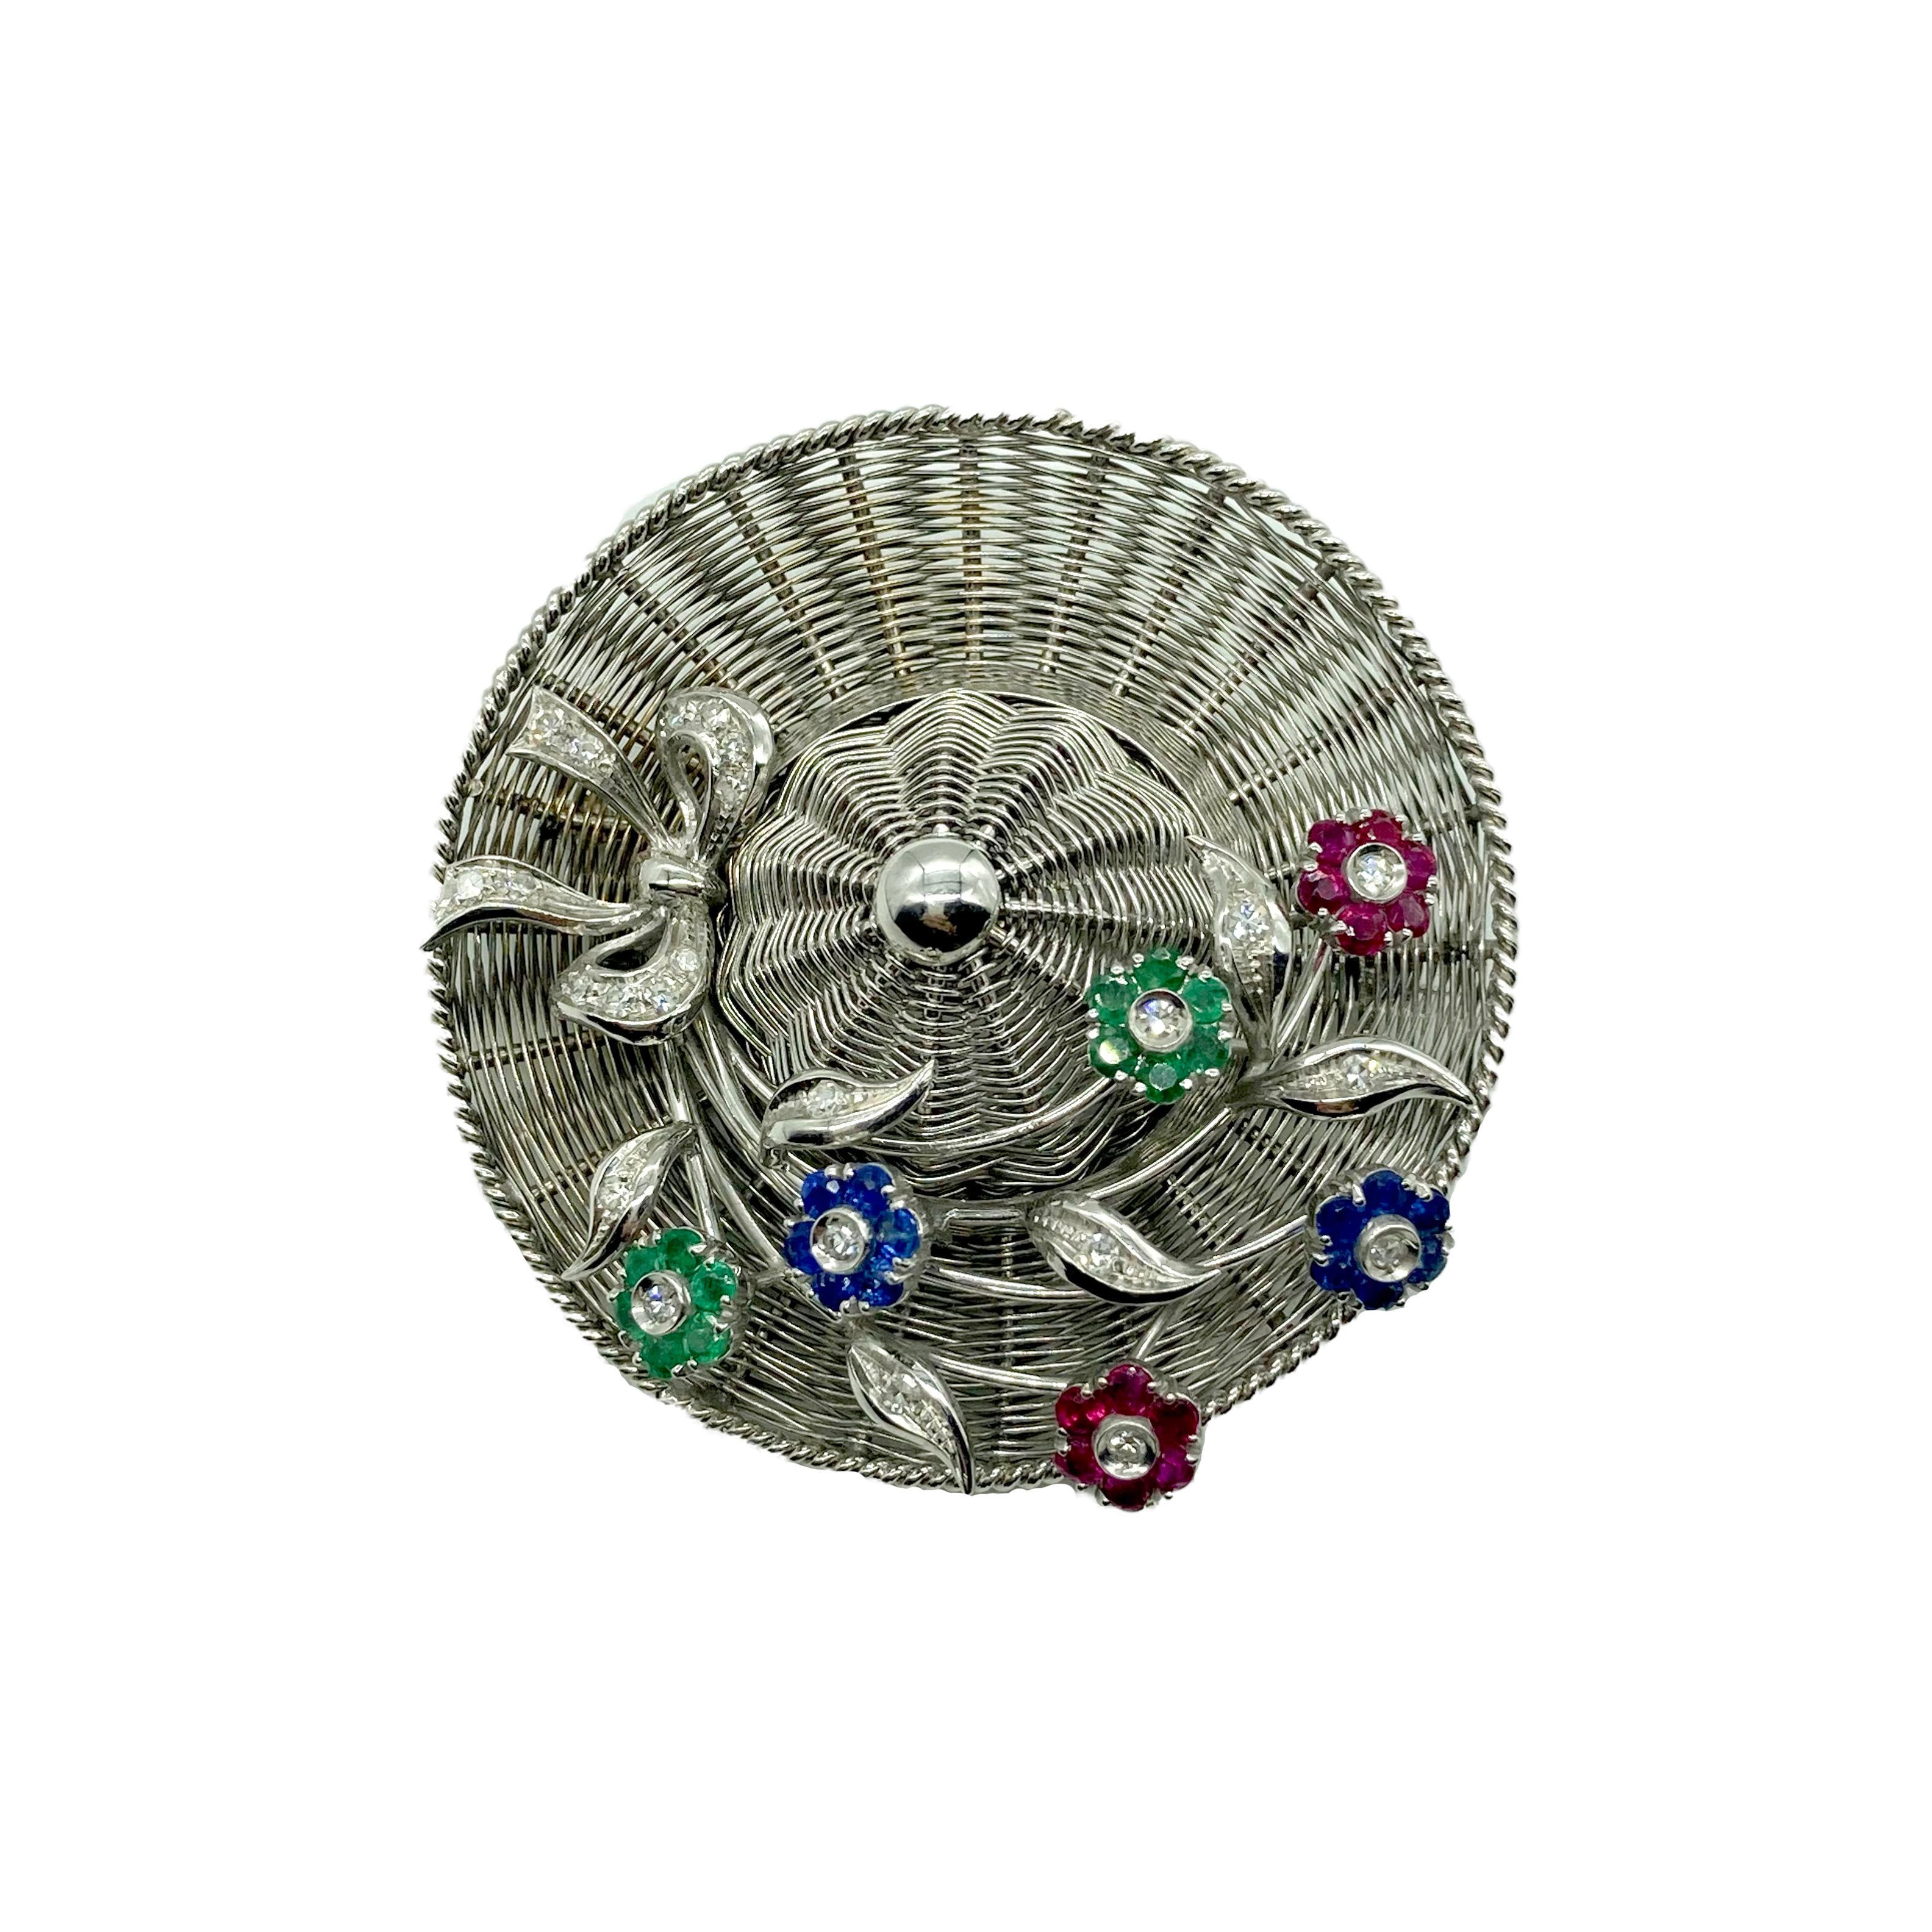 A fun brooch by historic Caribbean jeweler Spritzer & Fuhrmann, featuring an 18 karat white gold hat decorated with en tremblant gemstone flowers. Circa 1950s.